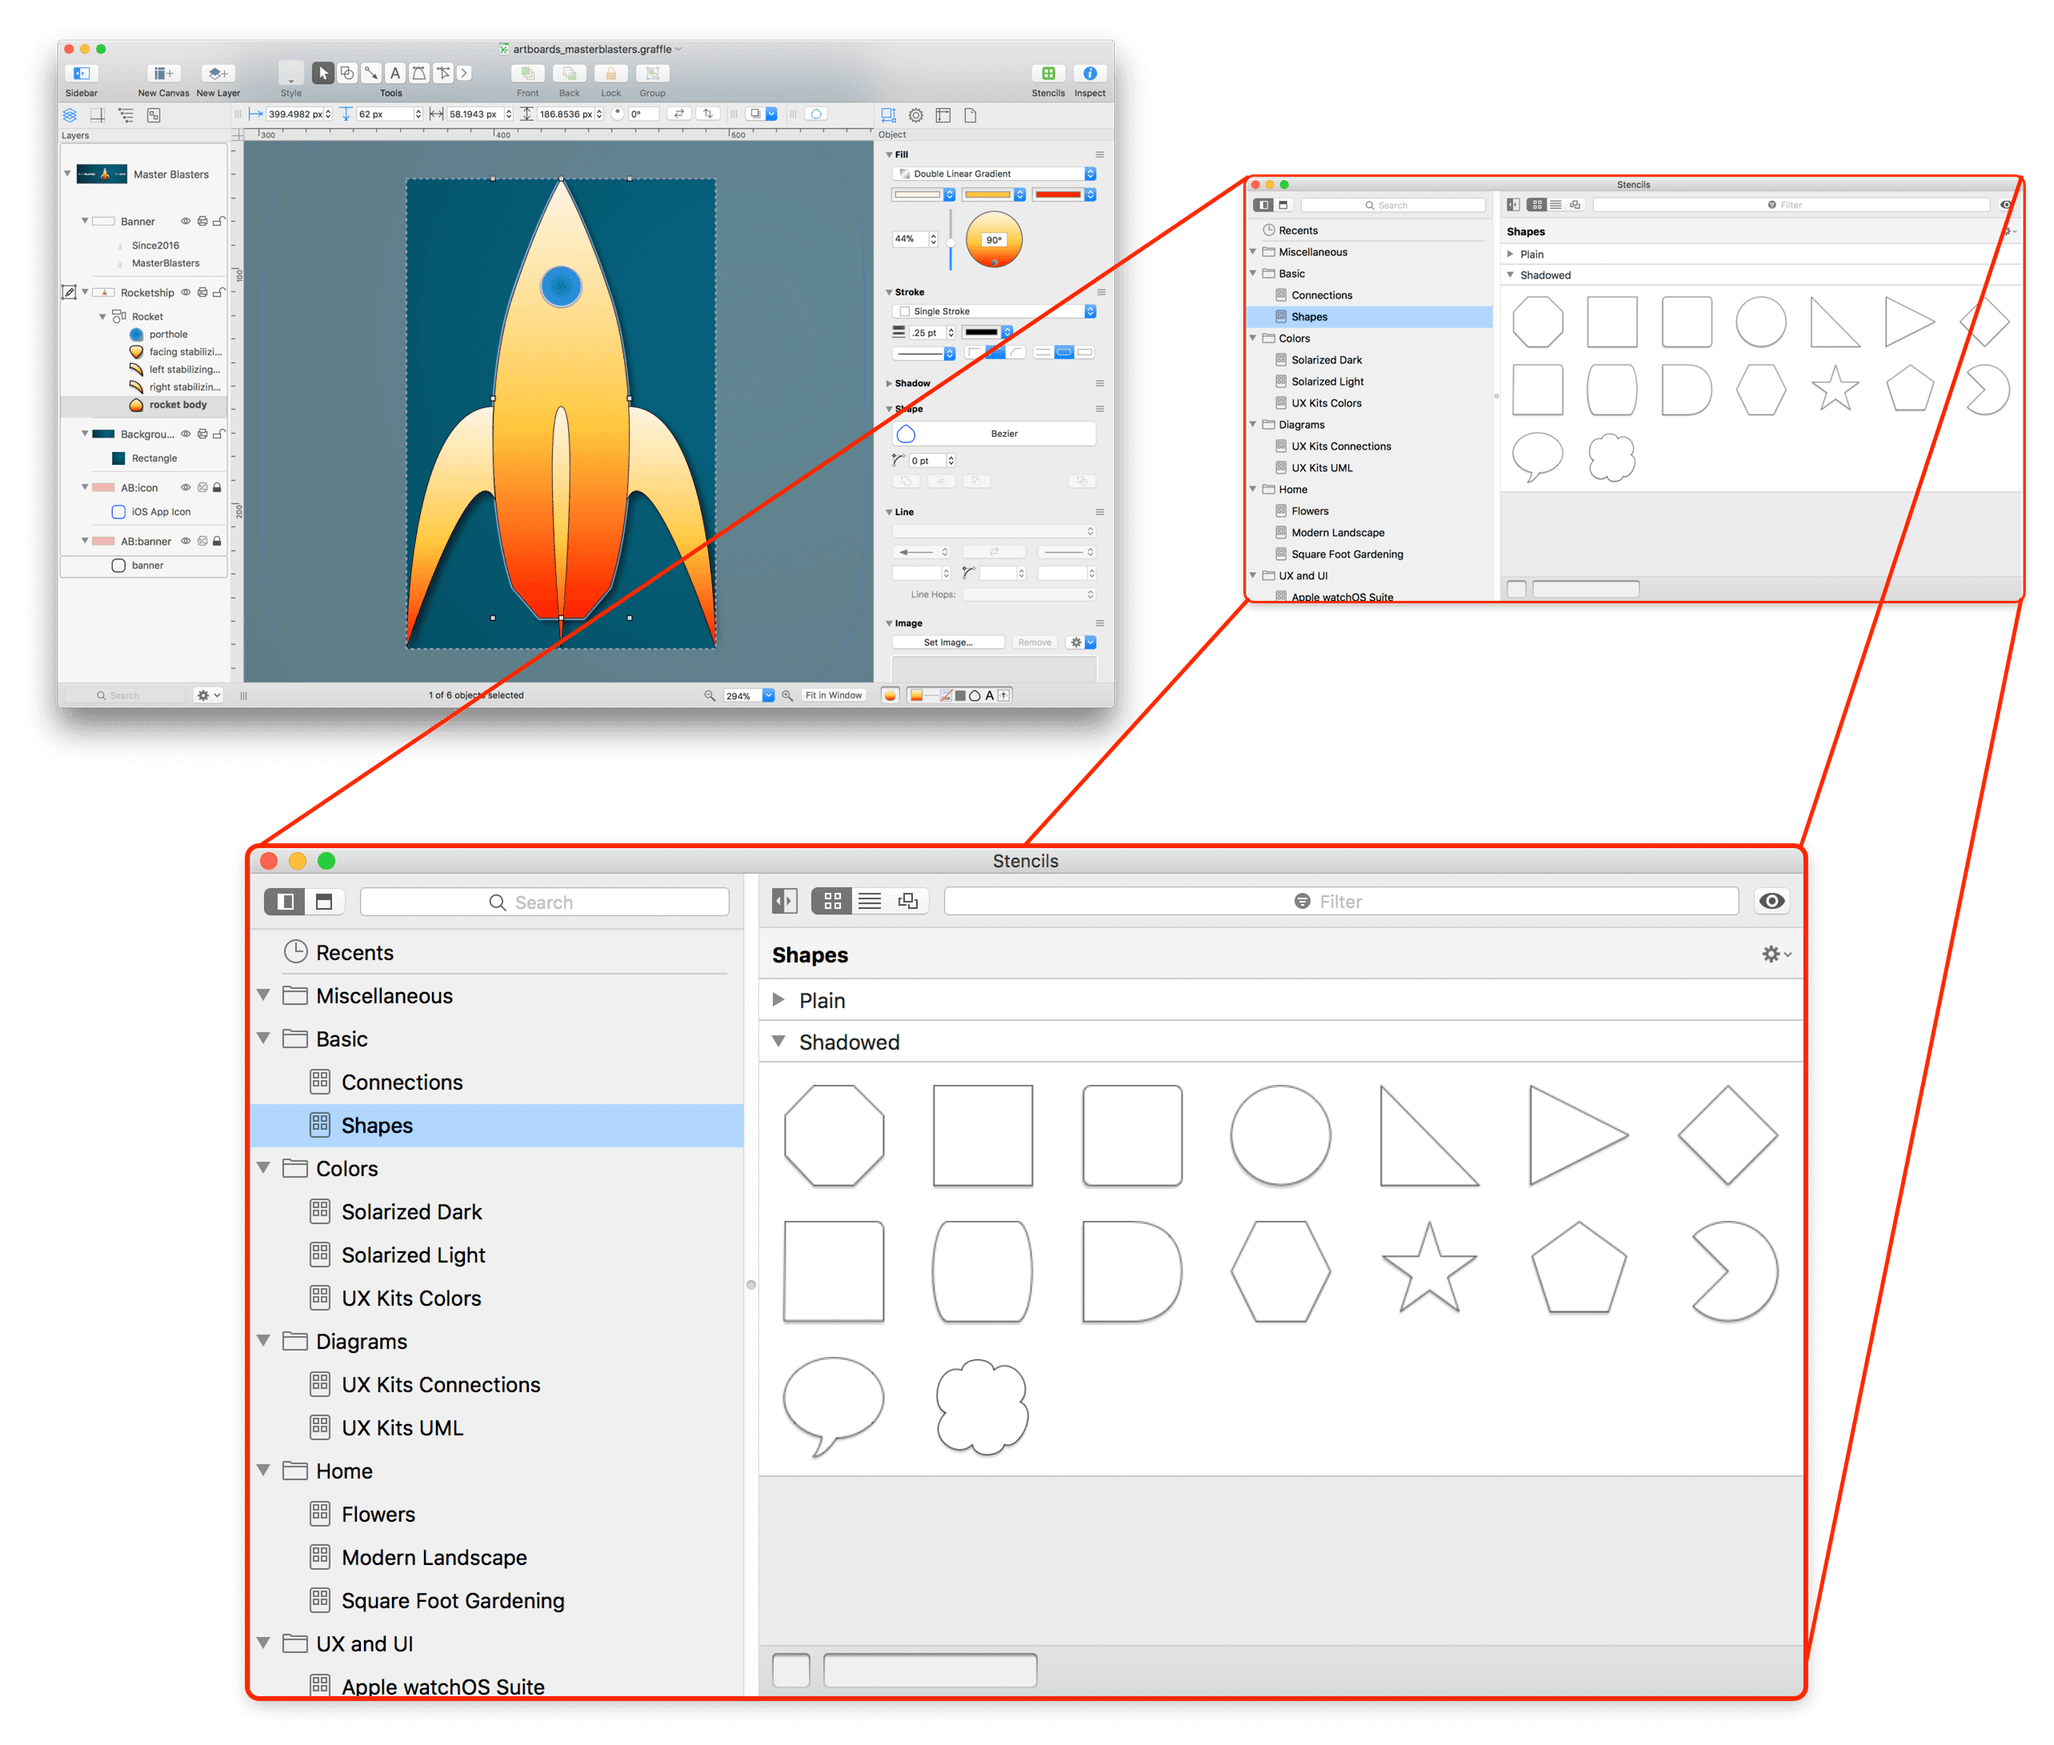 An exploding view of OmniGraffle, showing the Stencil Browser as a floating window, shown in a much larger scale than in the full window in the background.